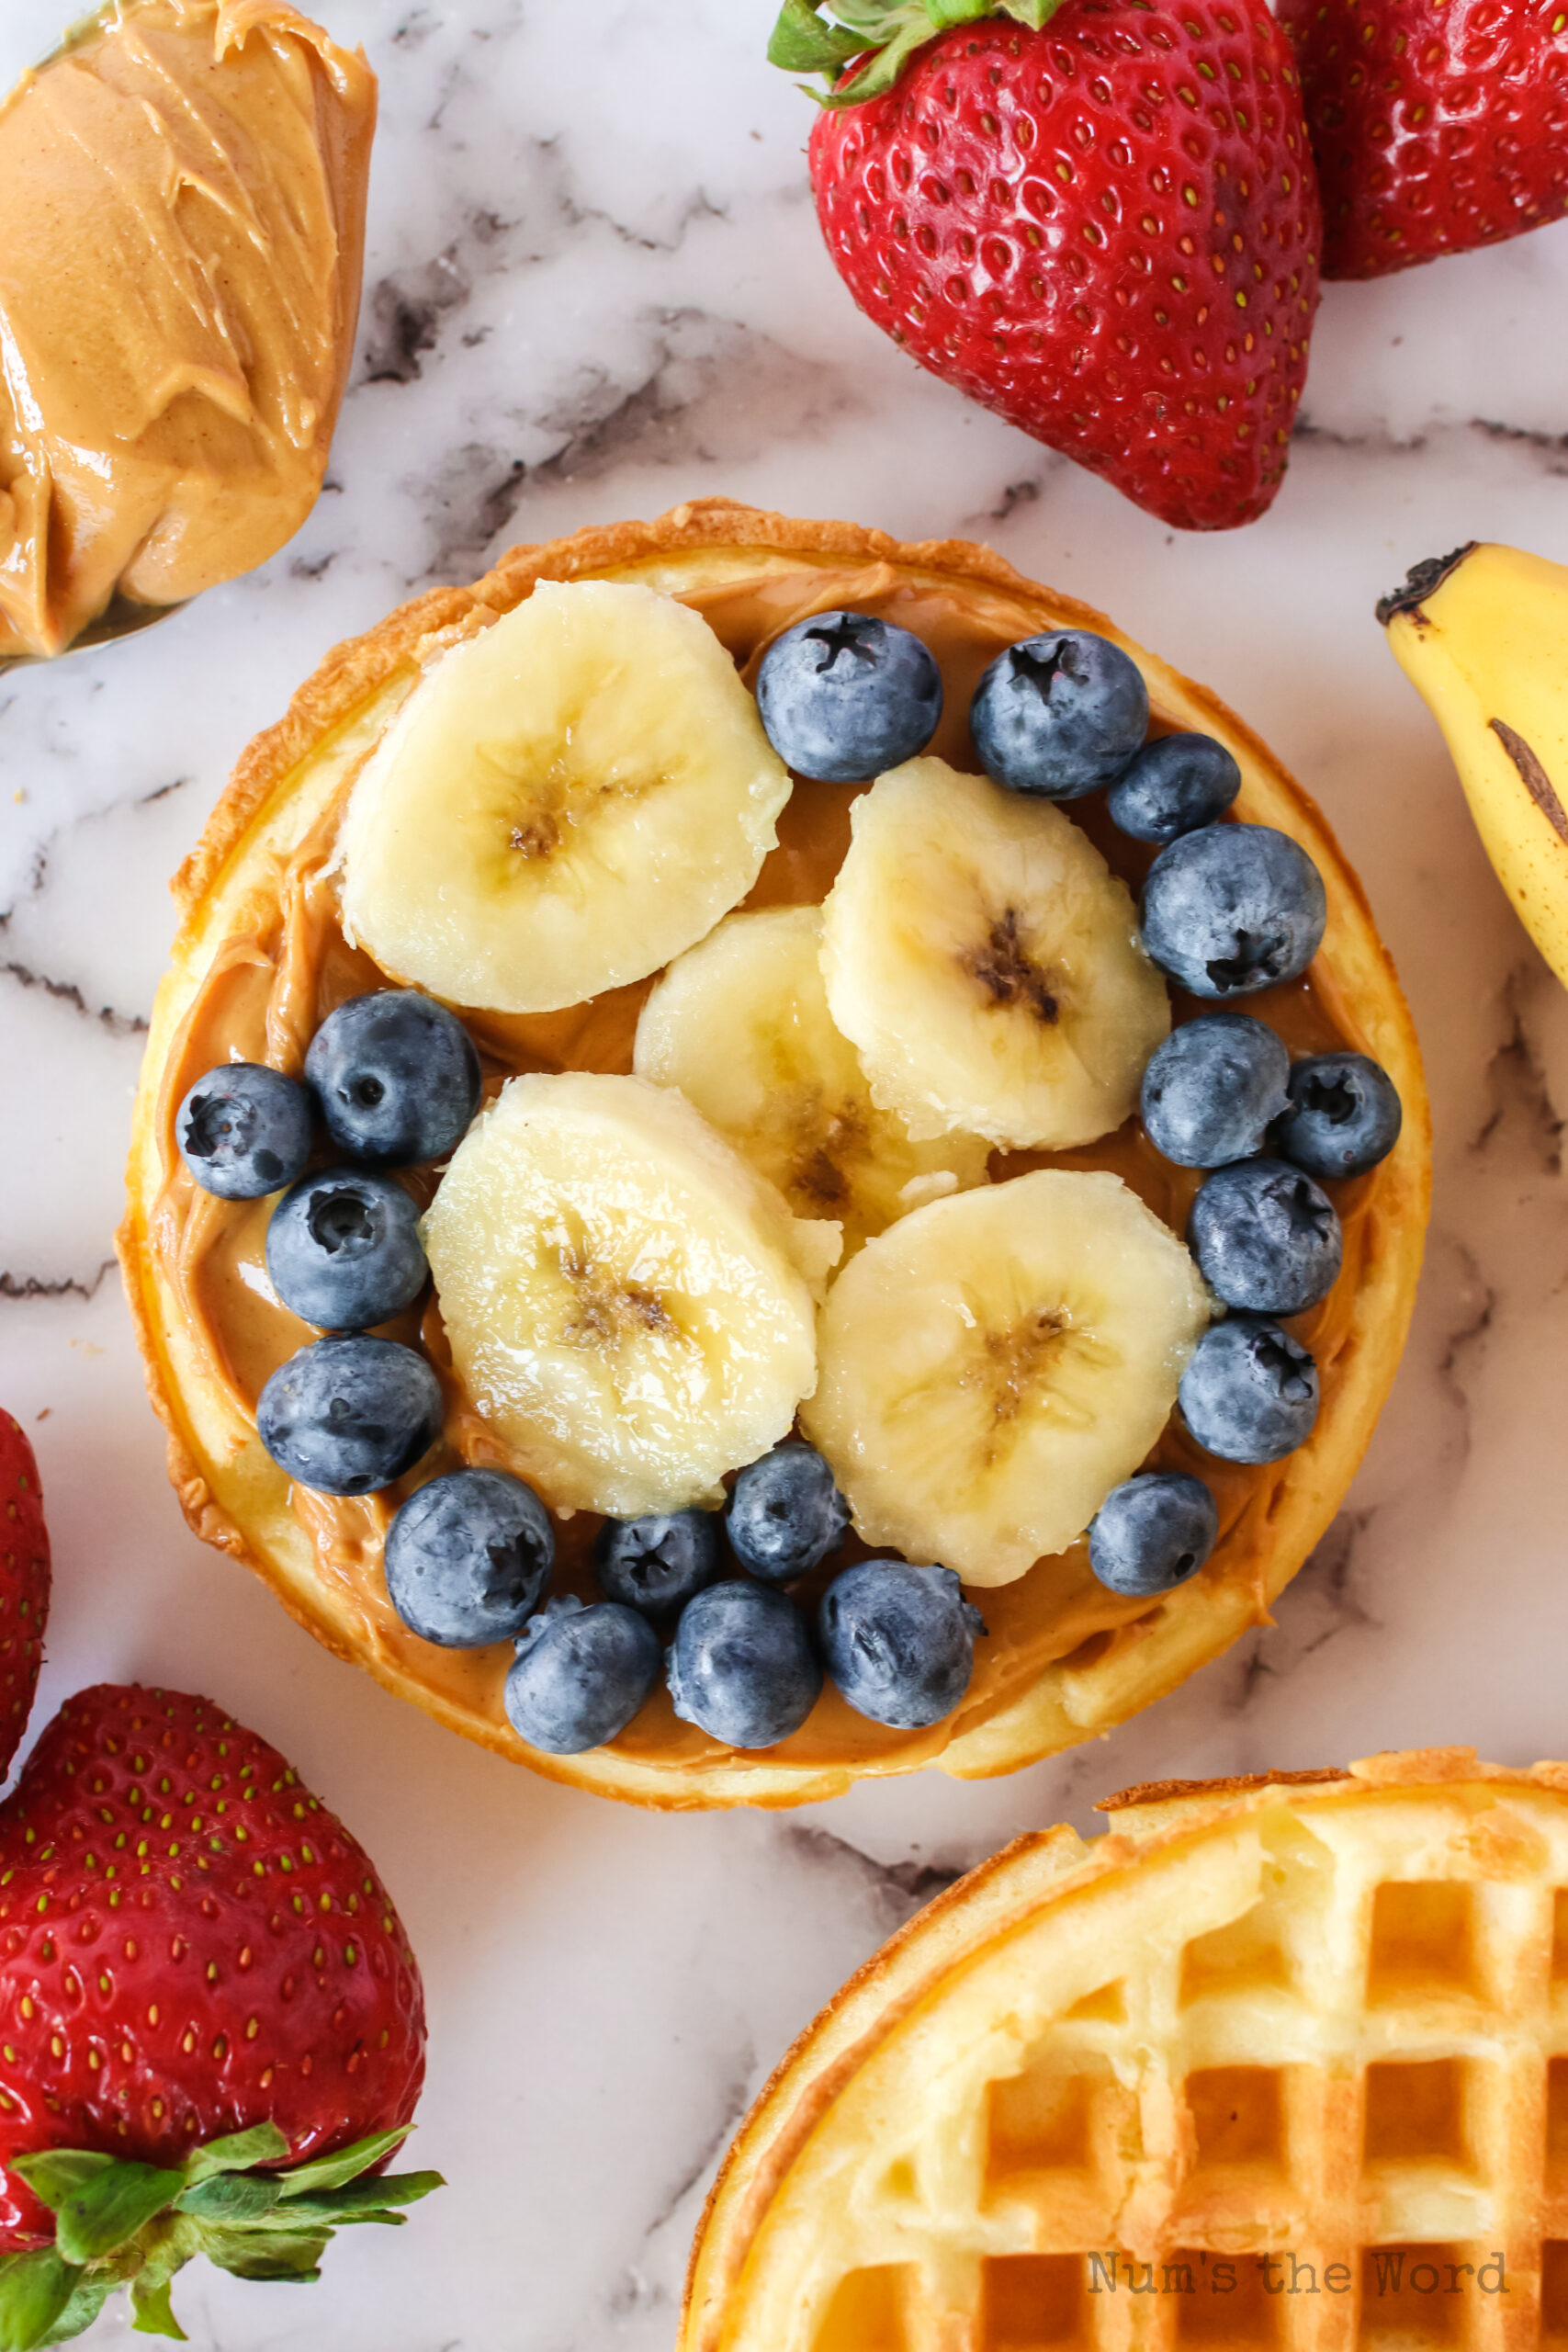 eggo pizza with sliced bananas and blueberries